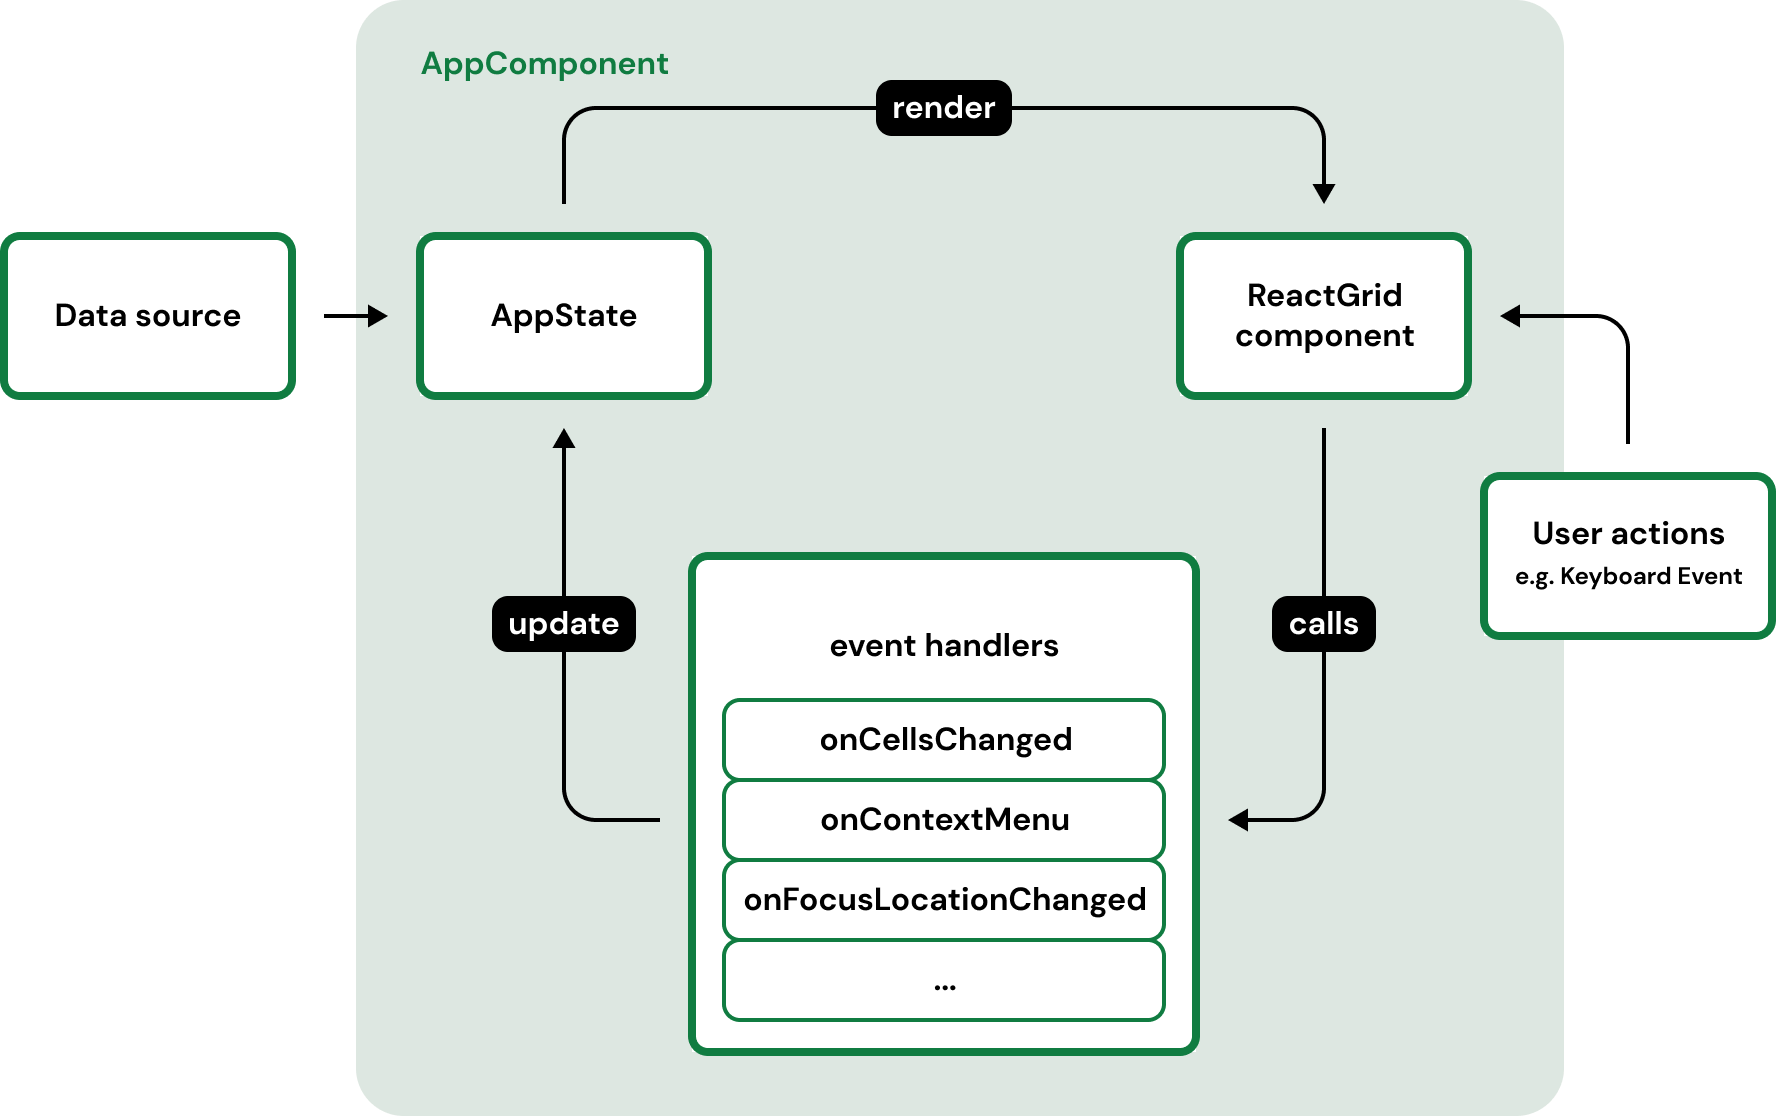 Sample component lifecycle that uses ReactGrid